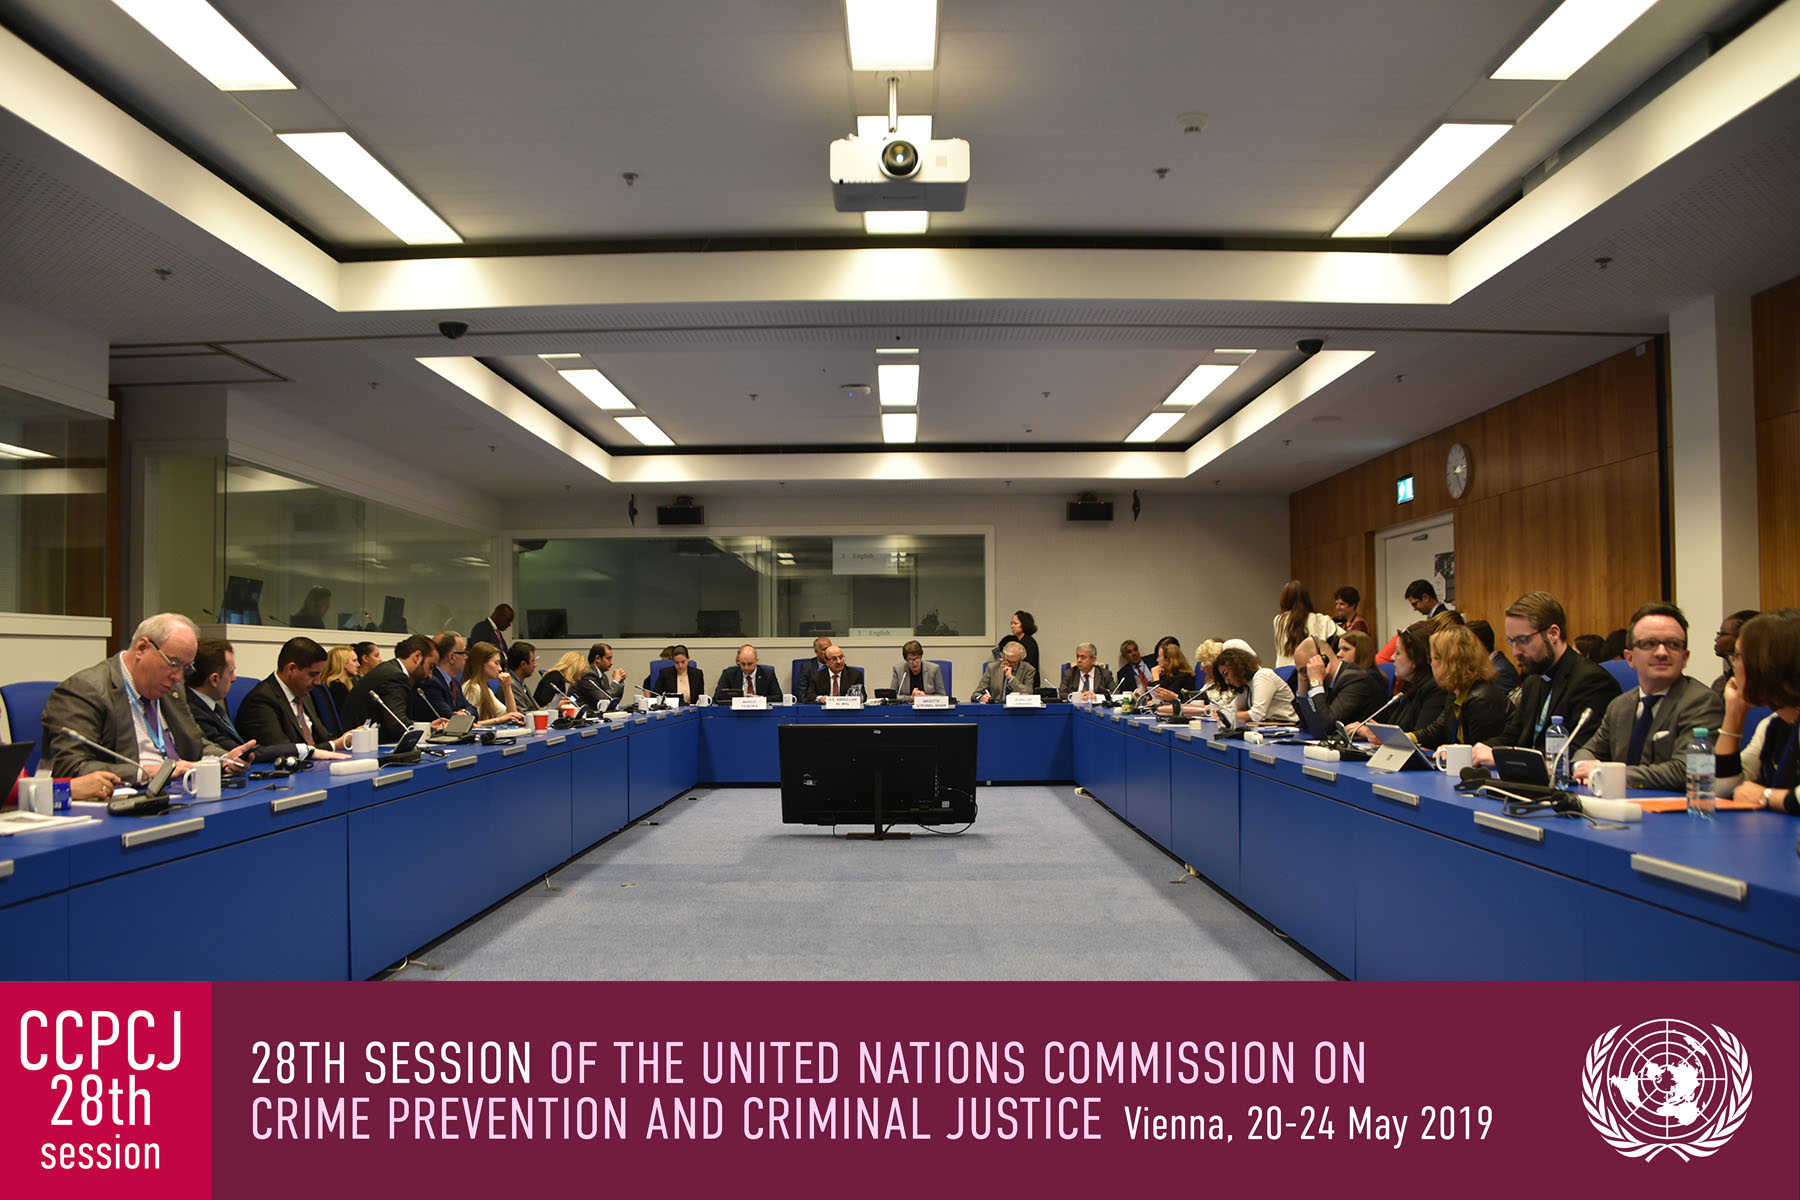 The Doha Declaration Global Programme: translating the outcome of the Crime Congress into concrete results to foster a culture of lawfulness – a special CCPCJ side event